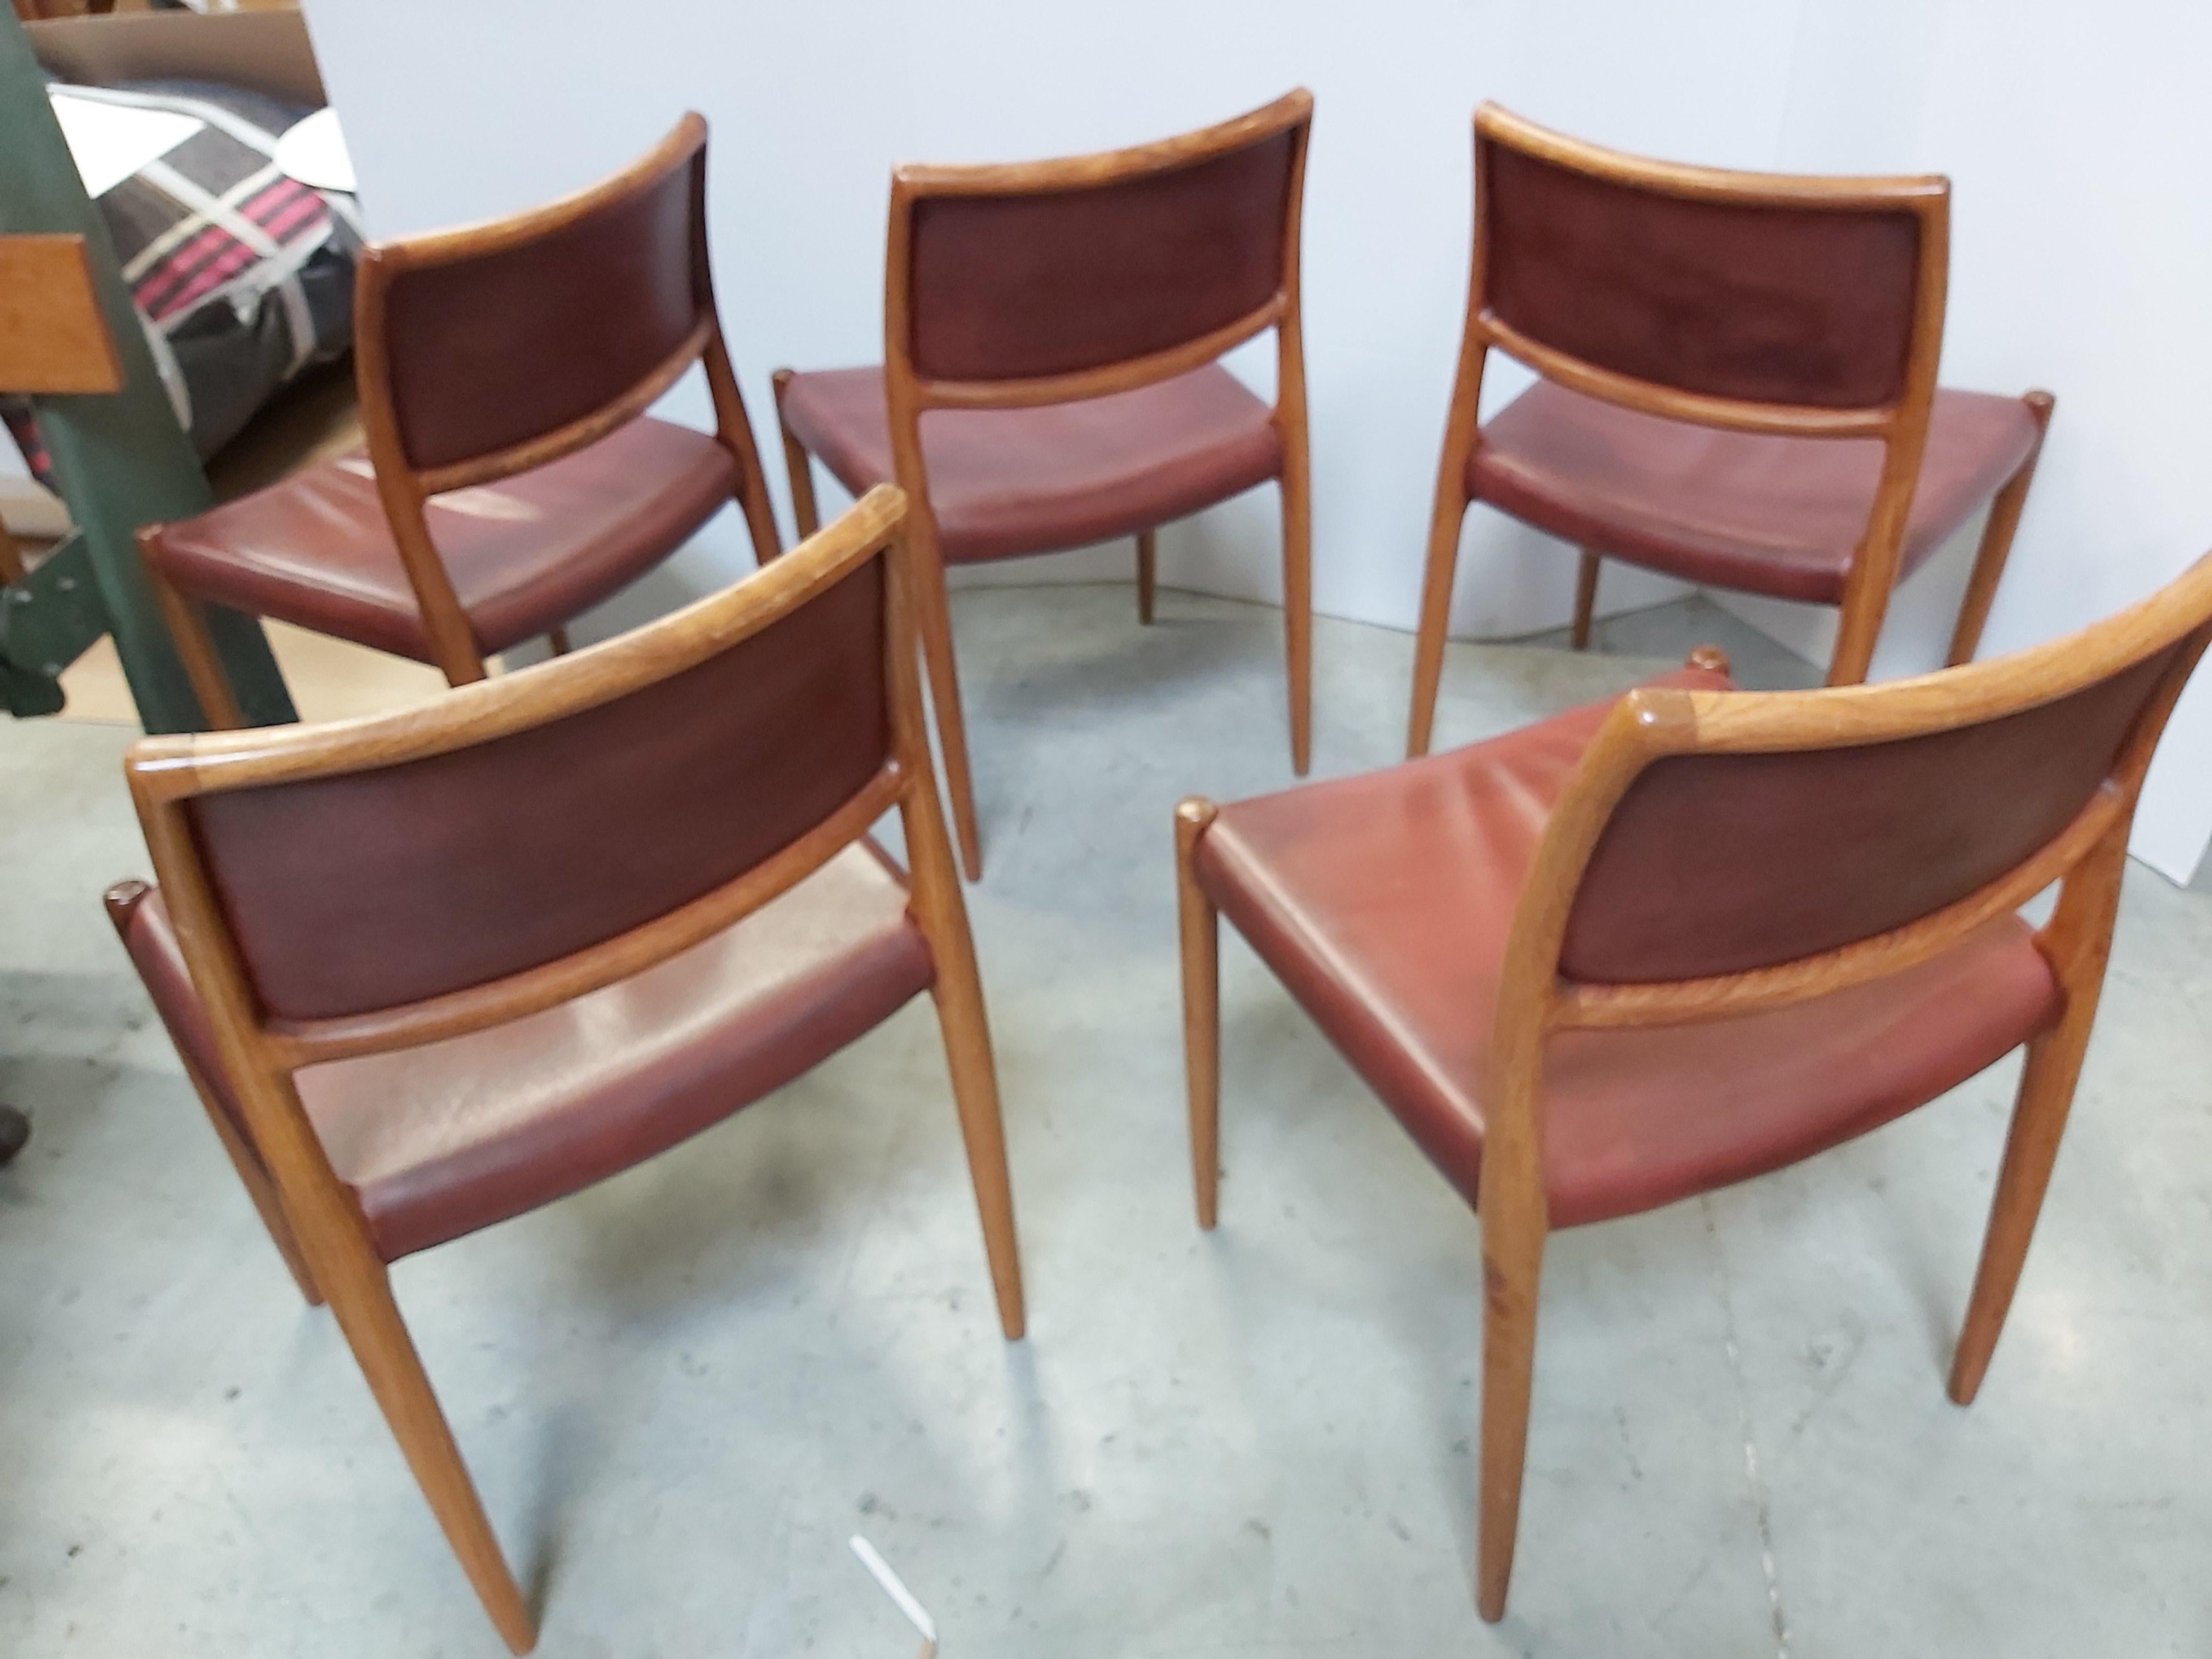 Niels Otto Moller Rosewood Armchair Mod N° 80 Set of 5 available For Sale 1